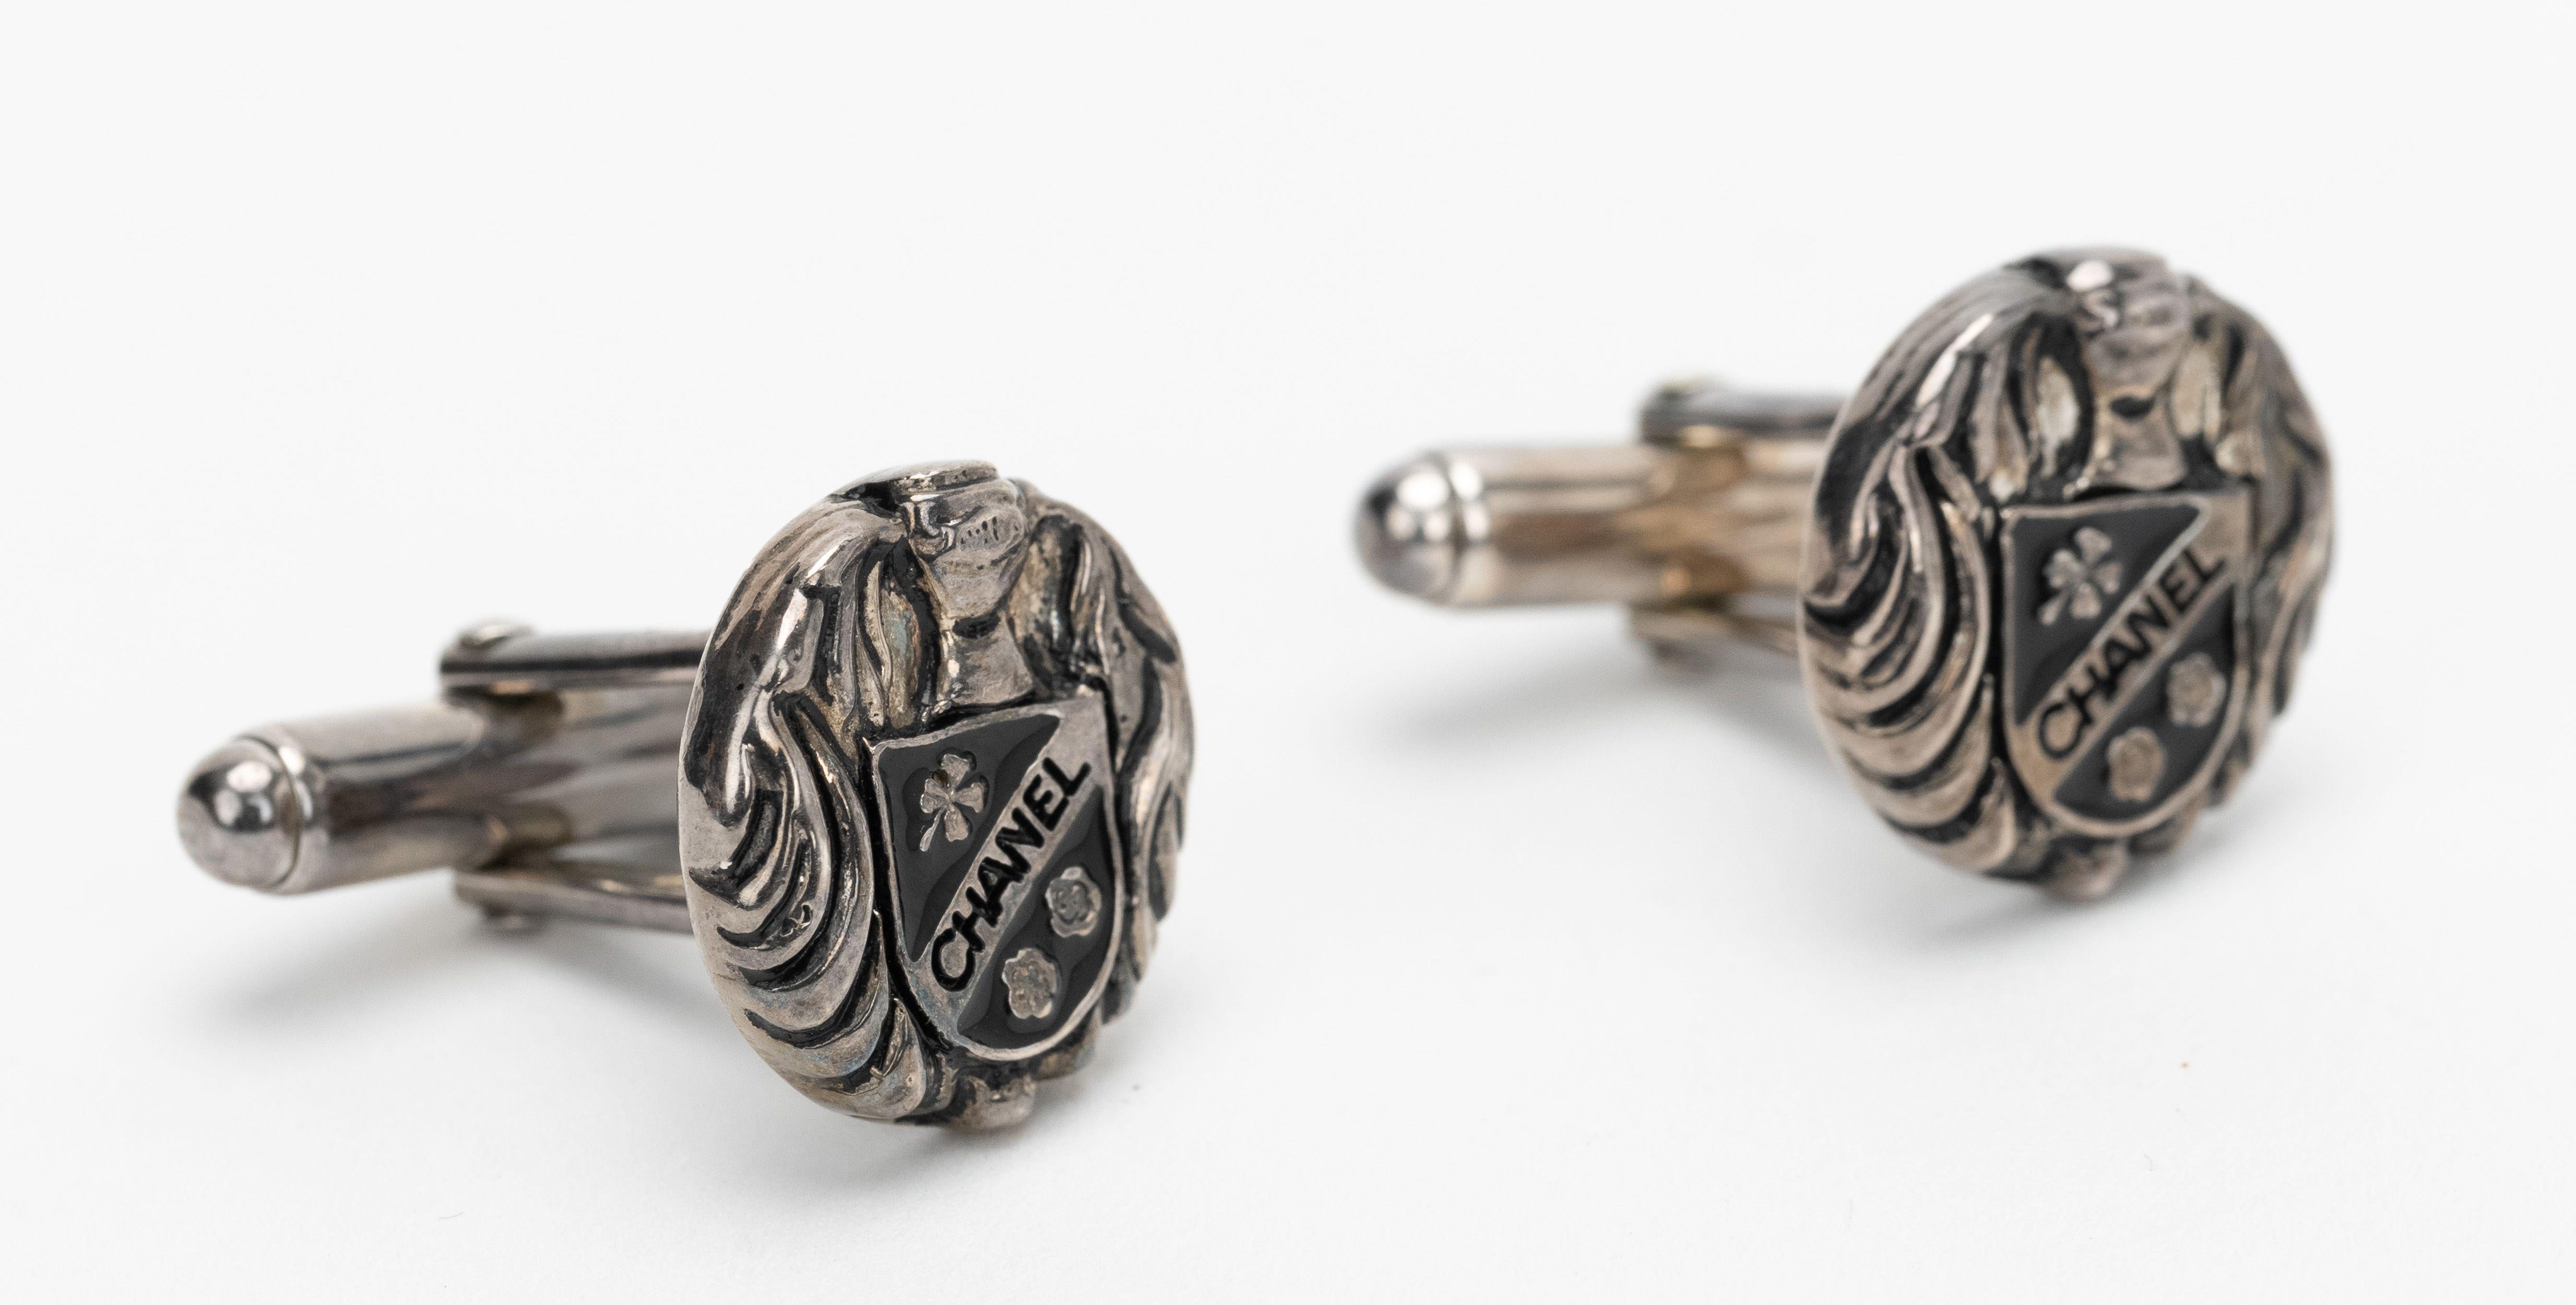 Chanel sterling silver cufflinks with crest logo design. Marked 925. Comes with velvet pouch.